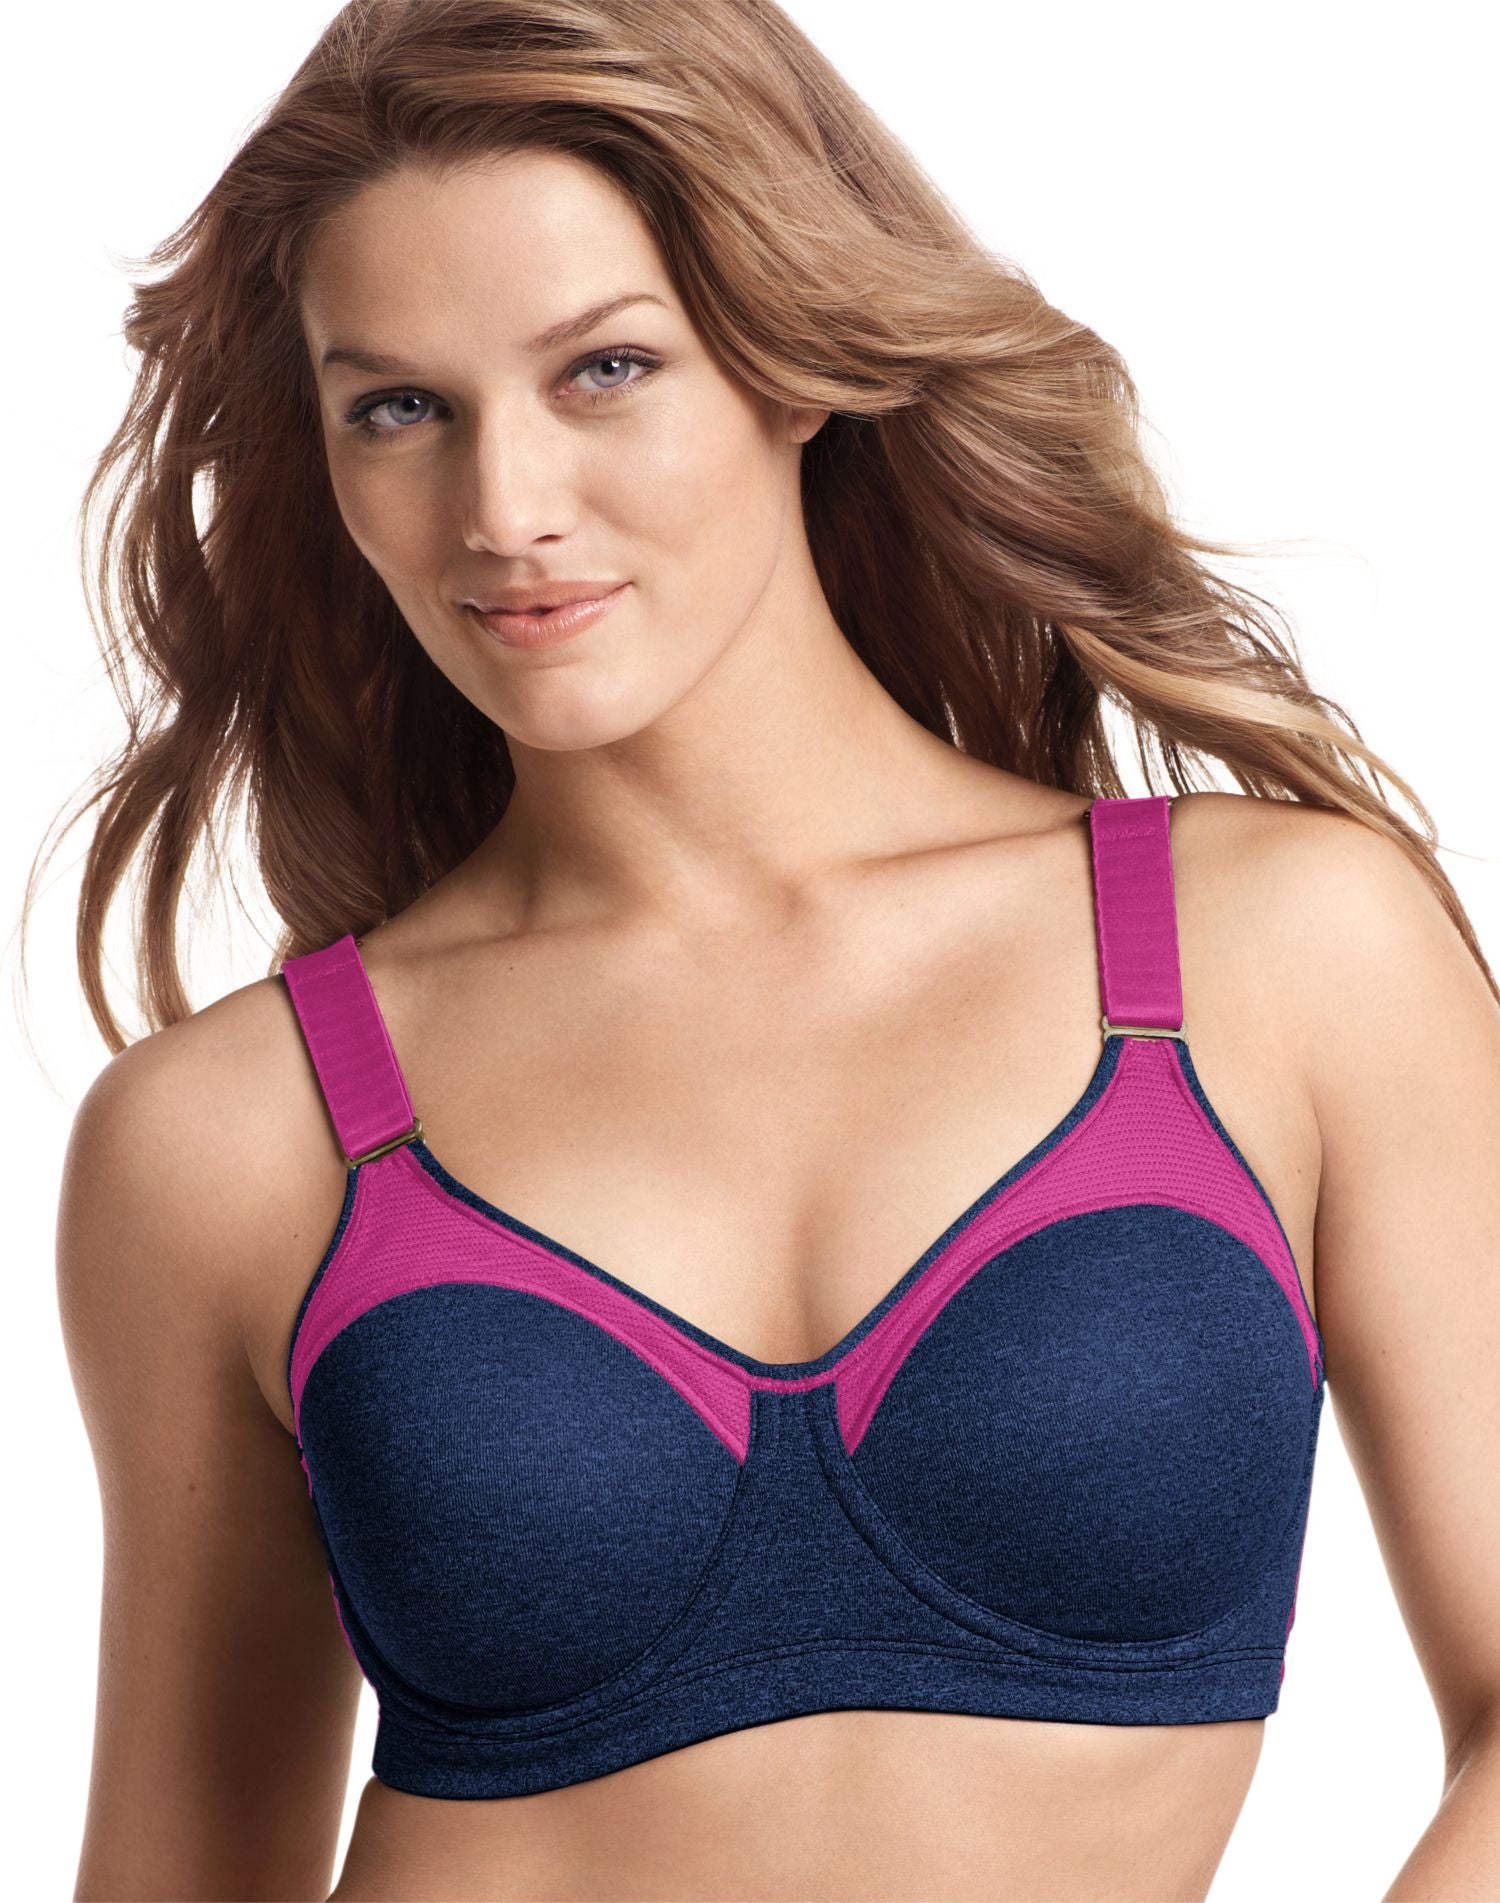 Playtex® Brand Introduces New Playtex Play™ Bra Collection For Active Women  Featuring Technology For A Flexible Fit